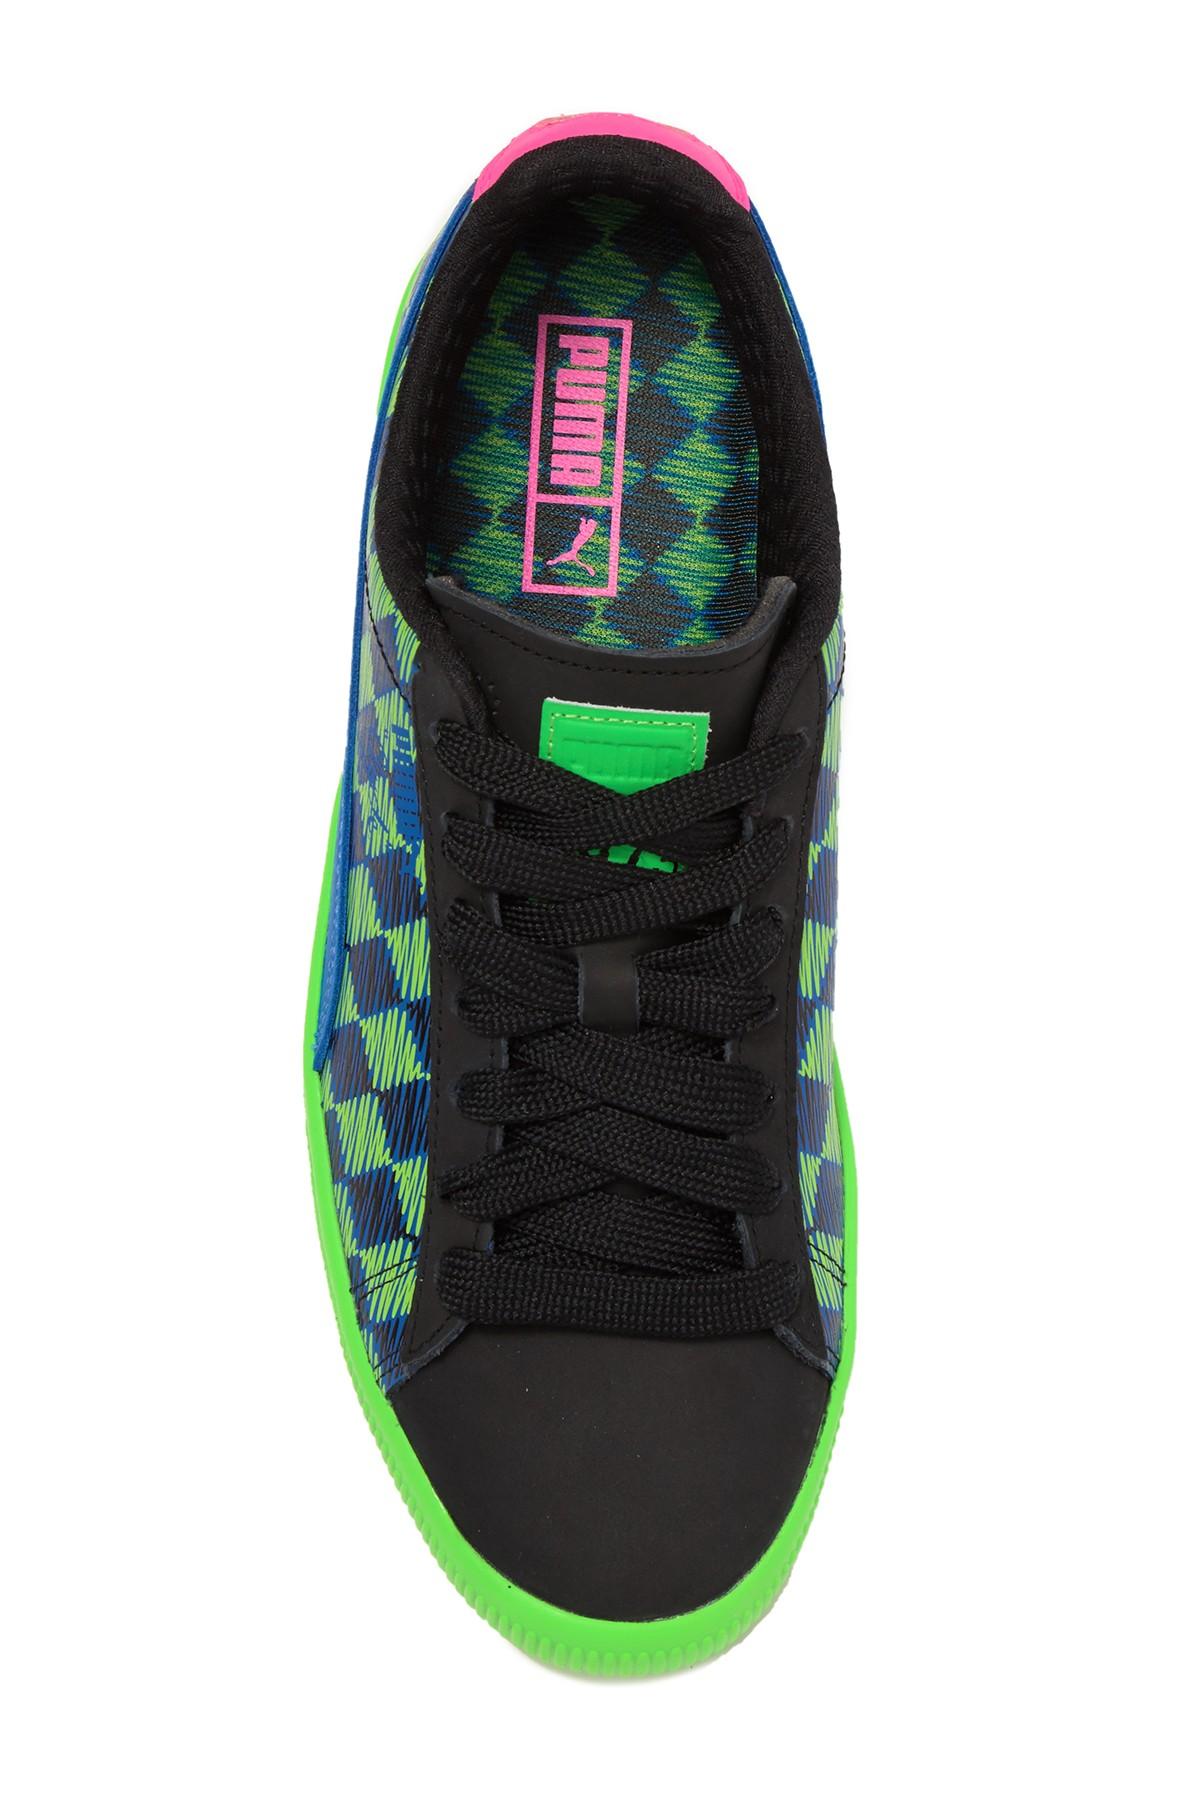 PUMA Clyde Pit Crew Sneakers in Black 